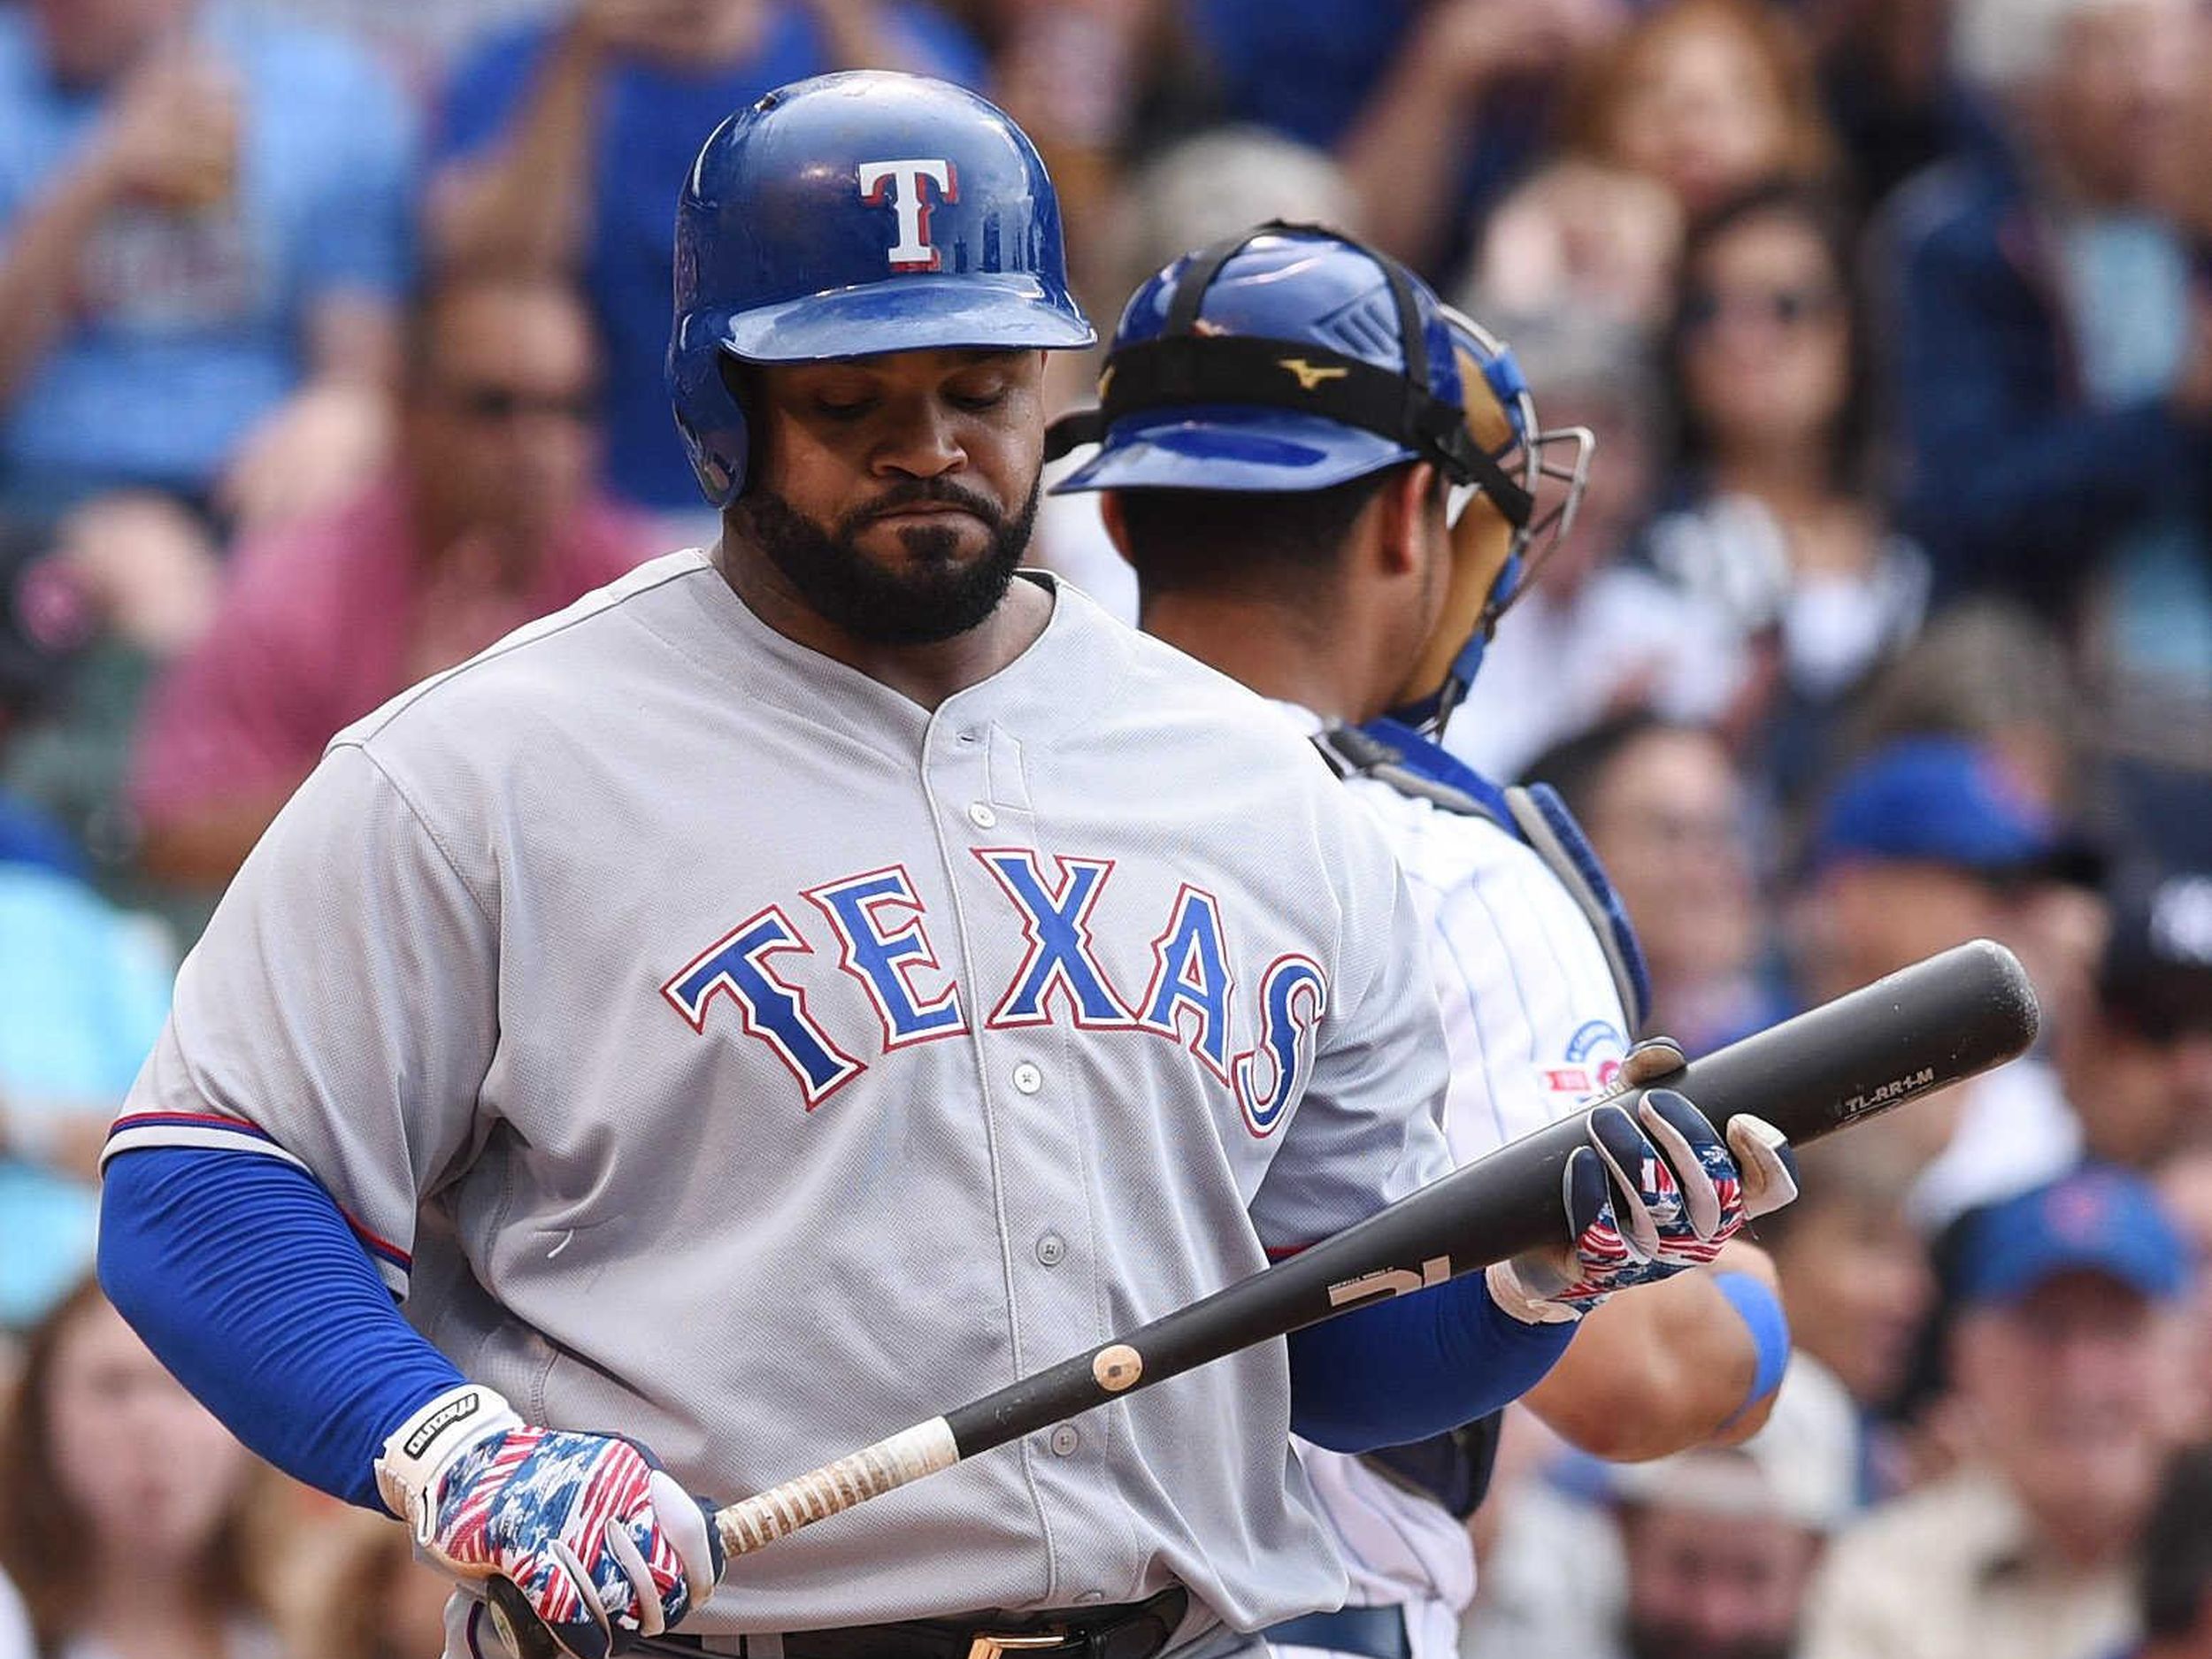 Neck injury ends Prince Fielder's 12-year MLB career